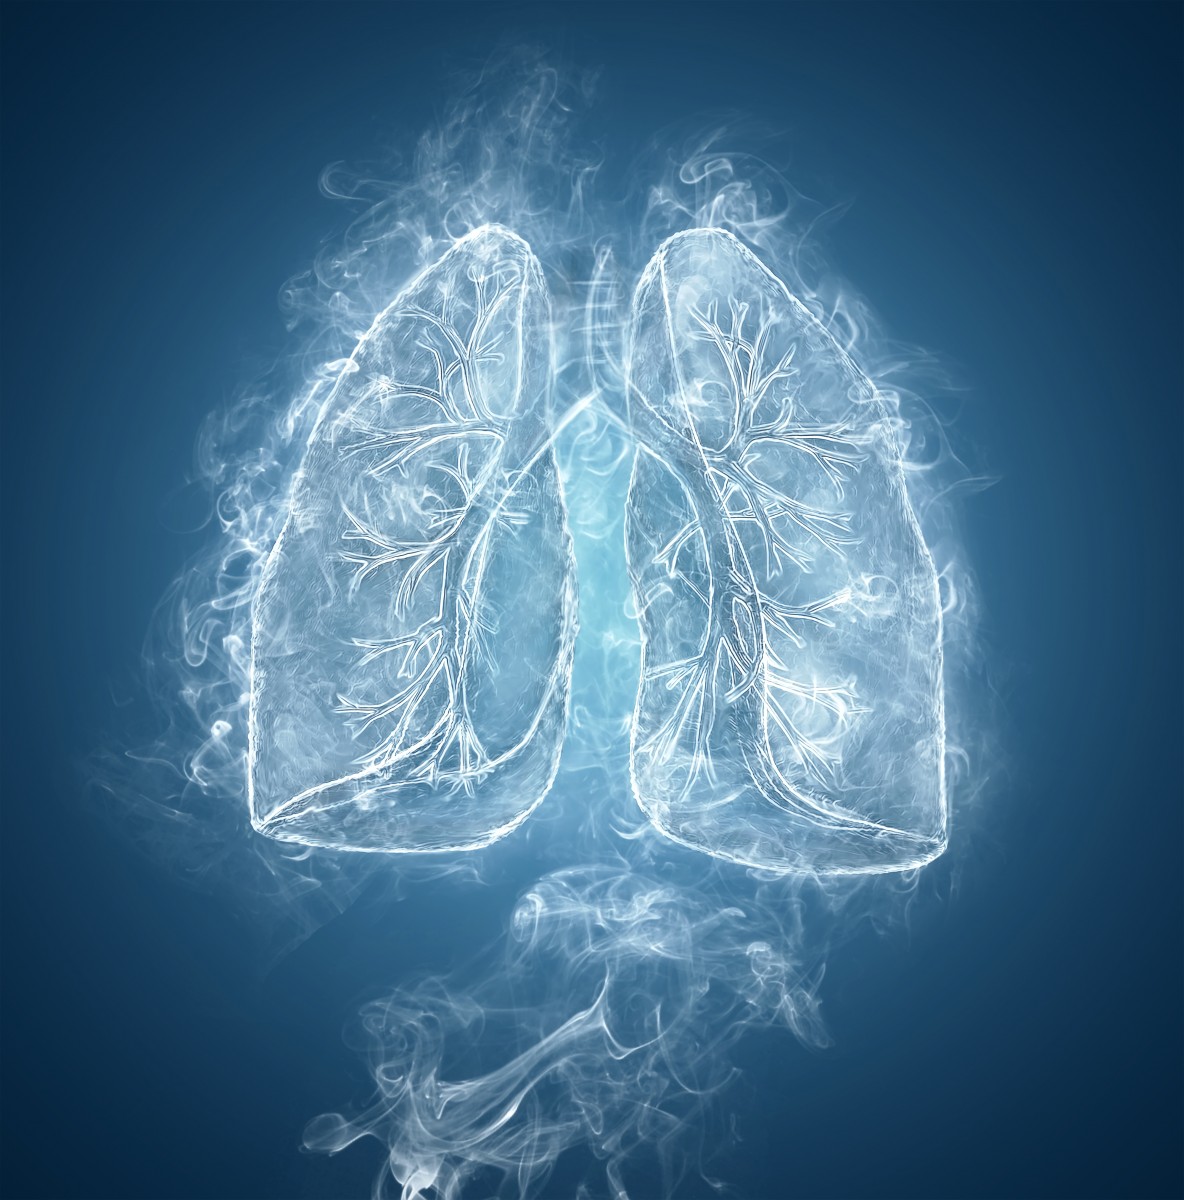 Keytruda May Soon Be Approved for Lung Cancer Treatment in EU